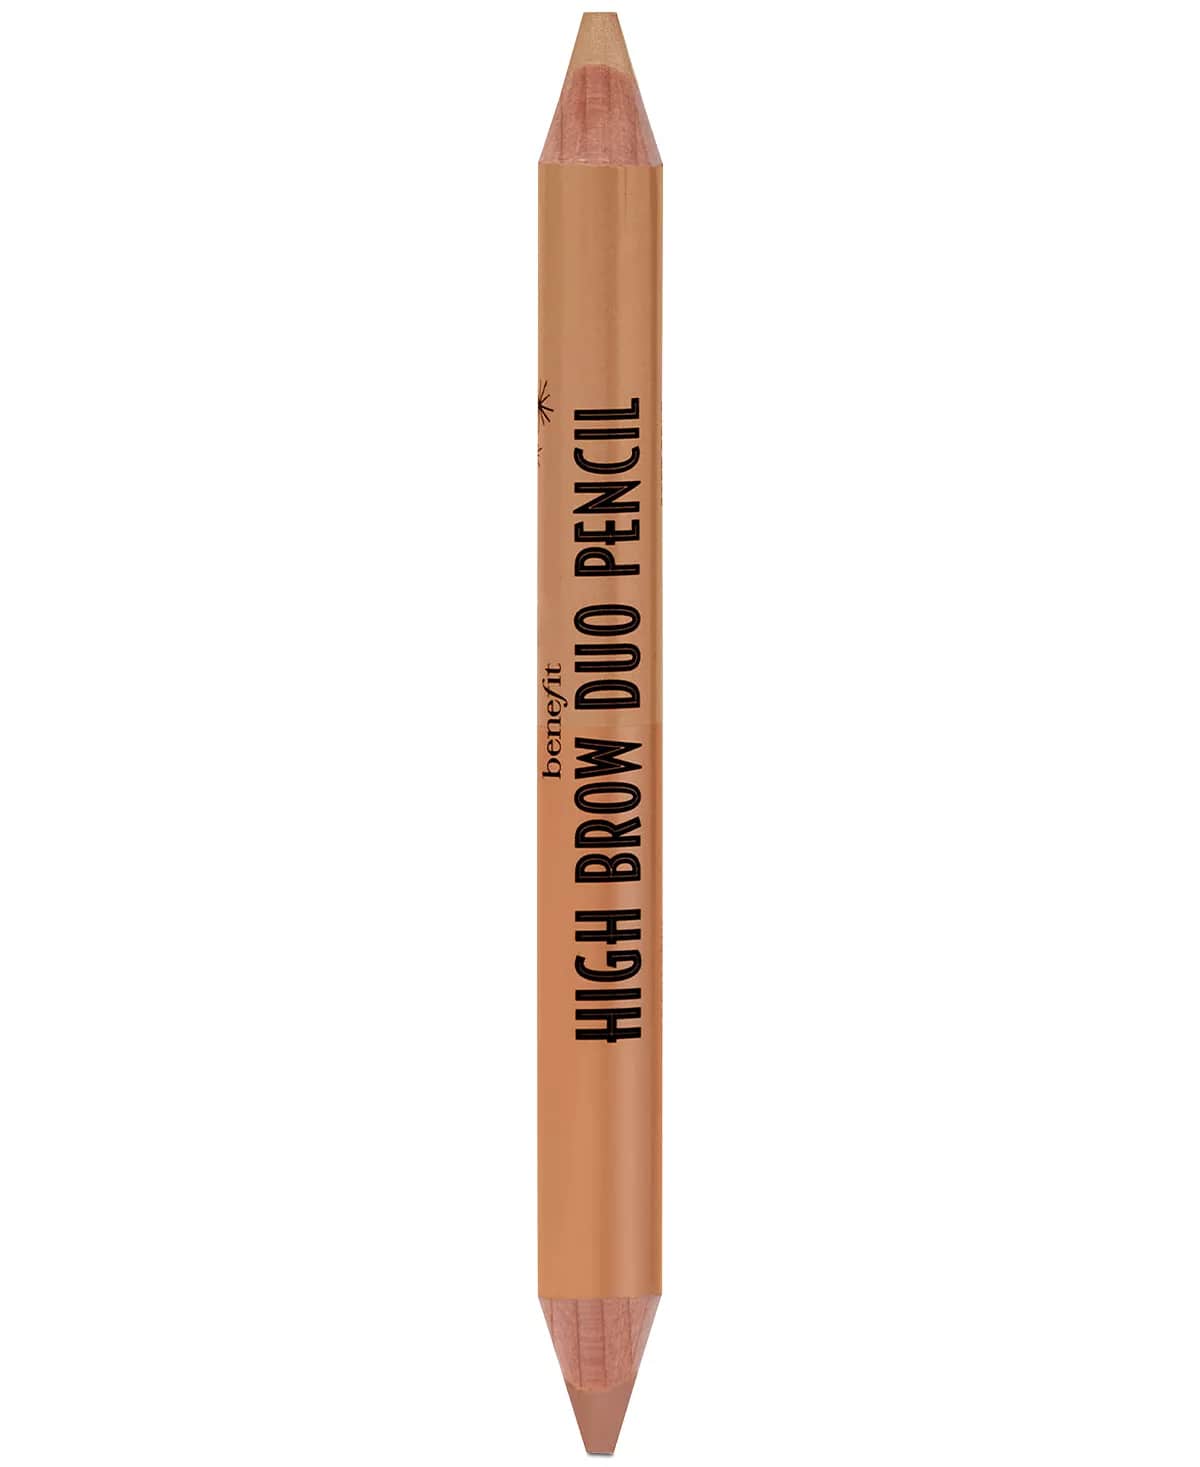 High Brow Duo Pencil by Benefit Cosmetics